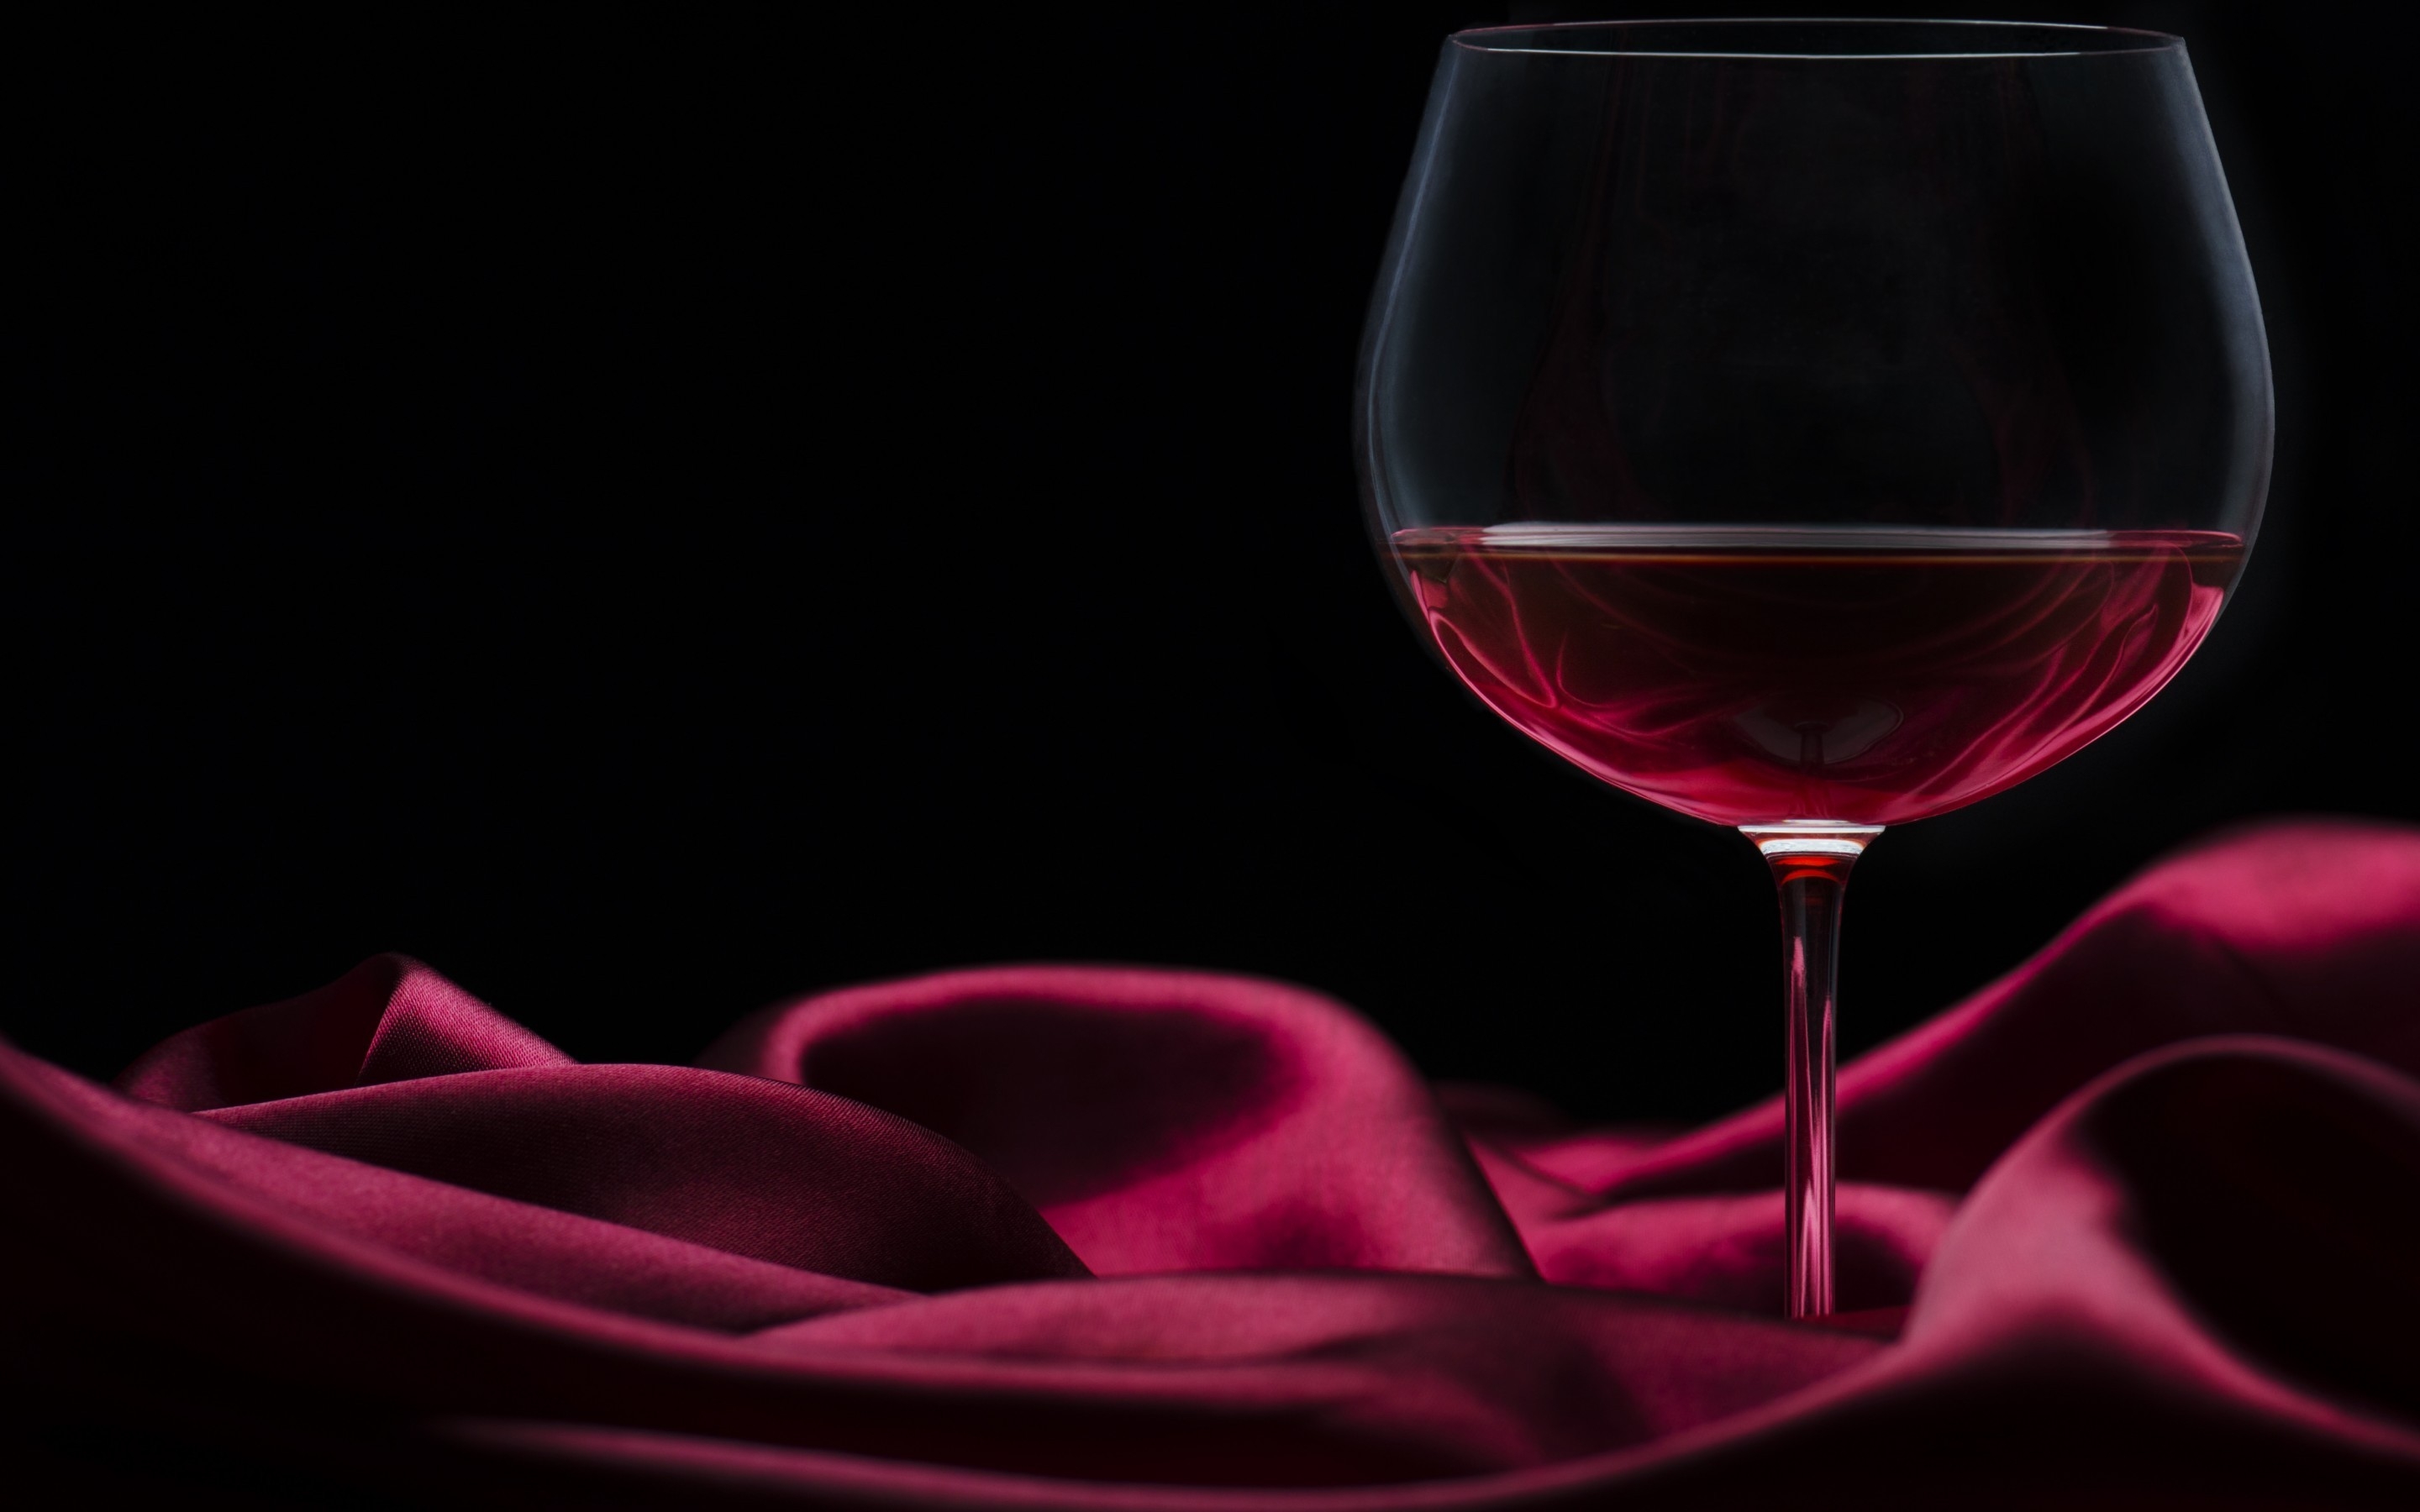 Black Background With Wine Glass - HD Wallpaper 